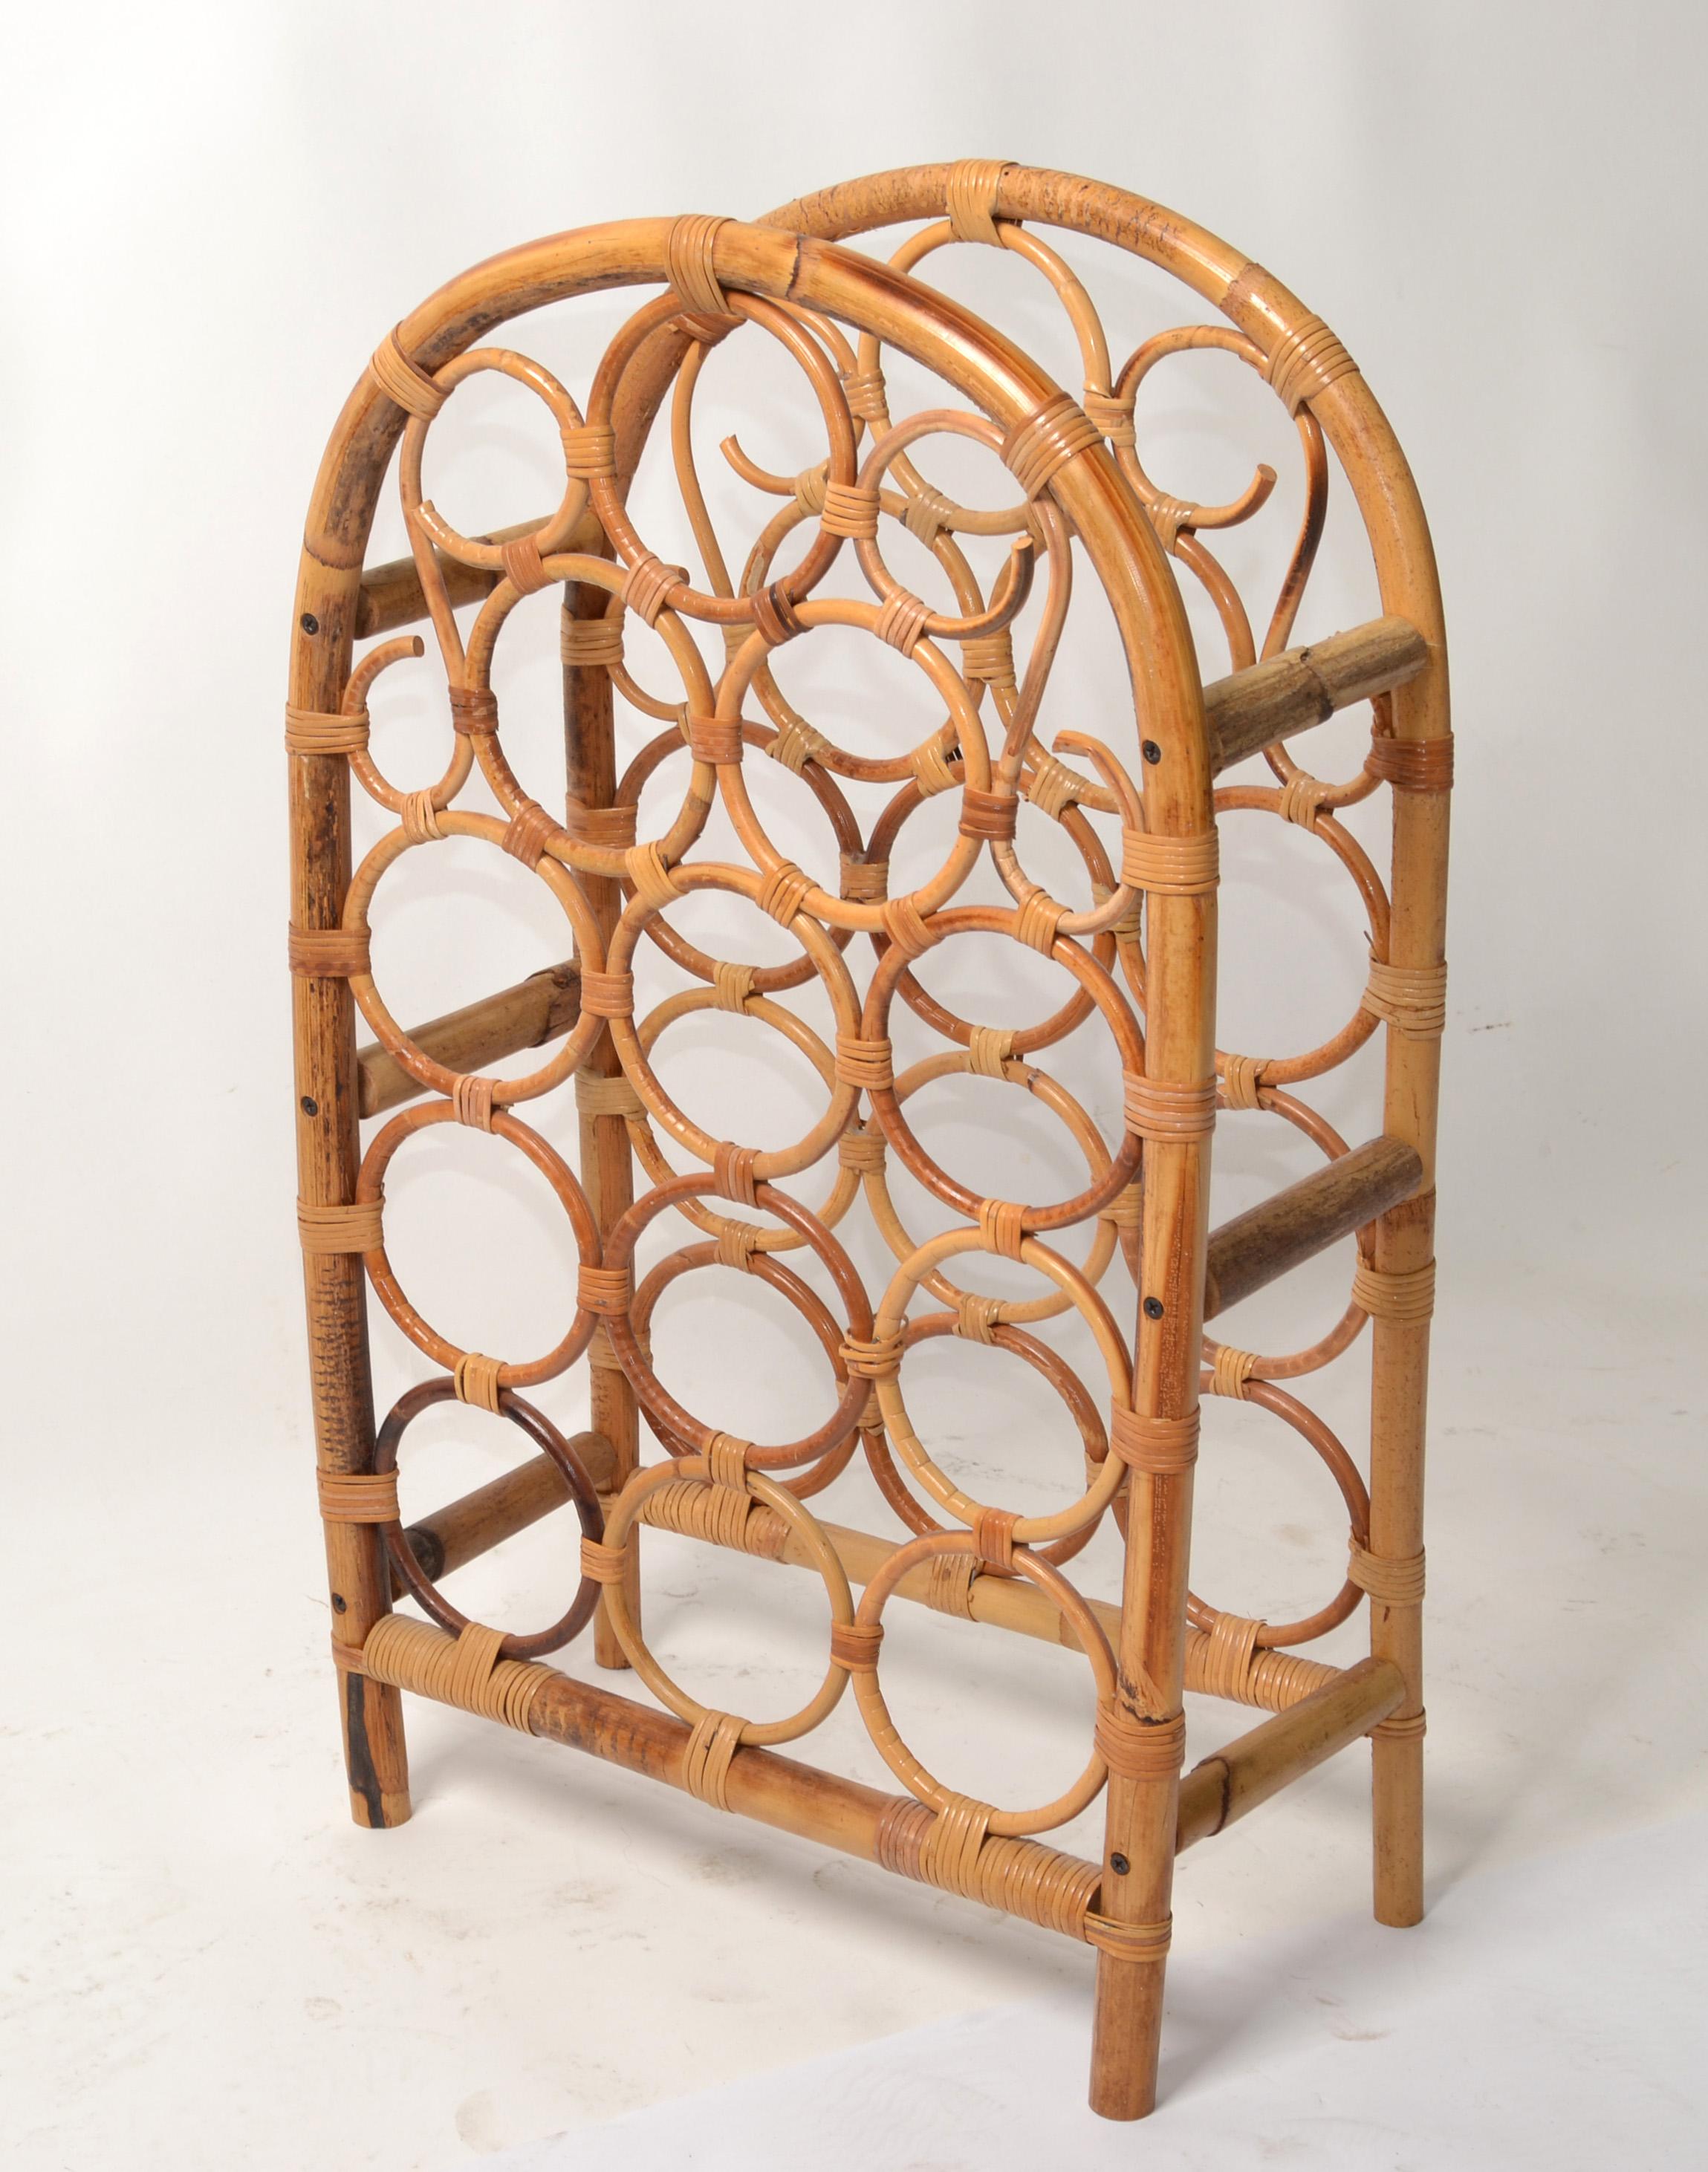 Vintage Tiki bar Arched burnt bamboo, cane and rattan twelve bottle wine rack, wine storage, wine basket.
The basket is firmly woven with beautiful circle Bamboo. 
It is made to hold 12 bottles.
Great Barware for a Tropical Bohemian Party Room.